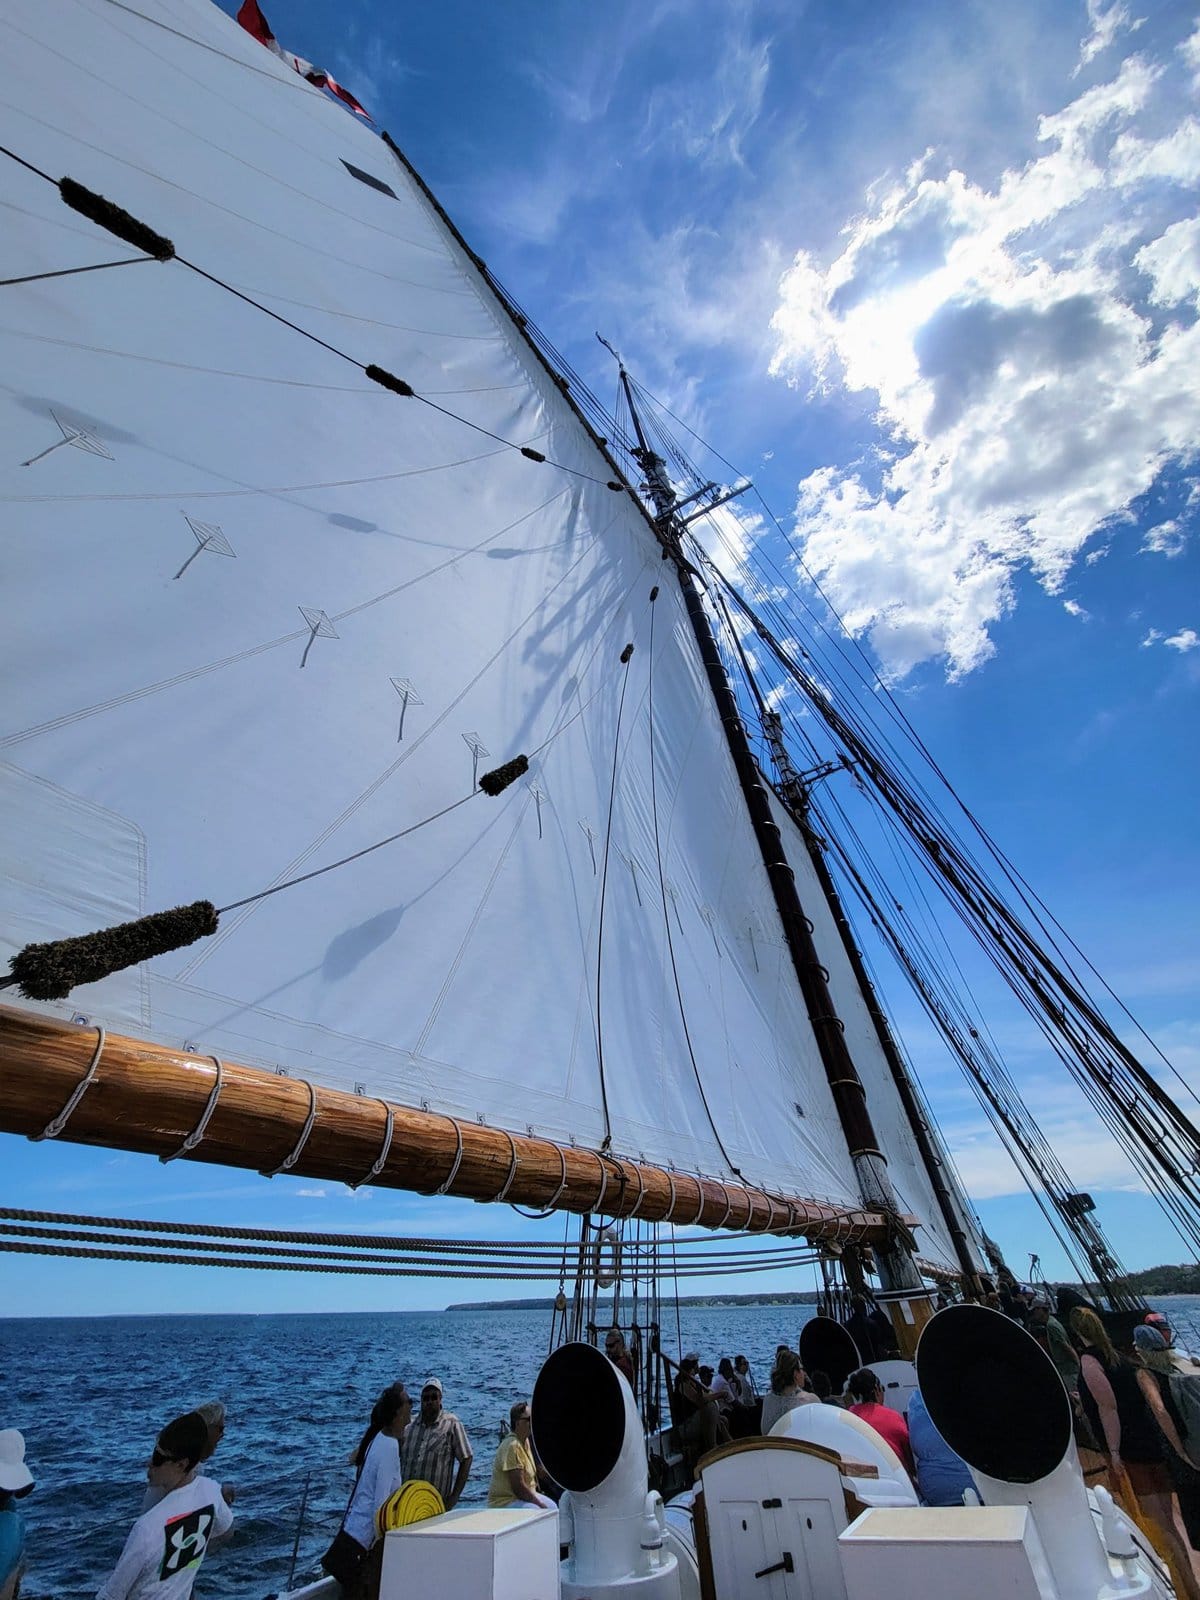 image description: the Bluenose sailing boat's sail, taken from the deck